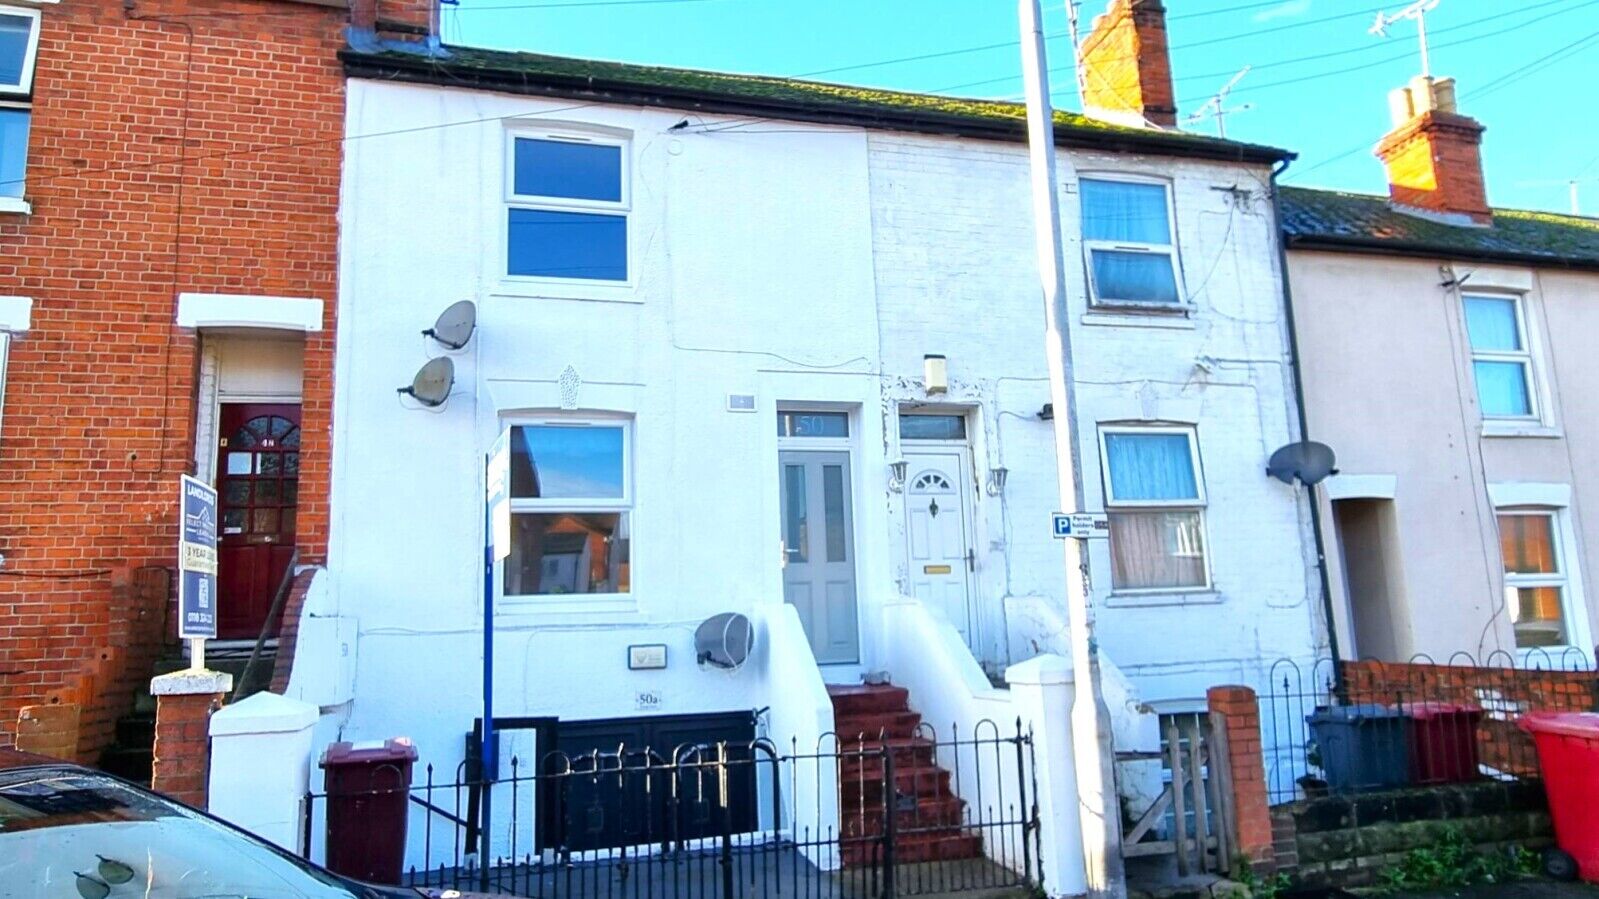 3 bedroom mid terraced flat to rent, Available from 05/07/2024 George Street, Reading, RG1, main image